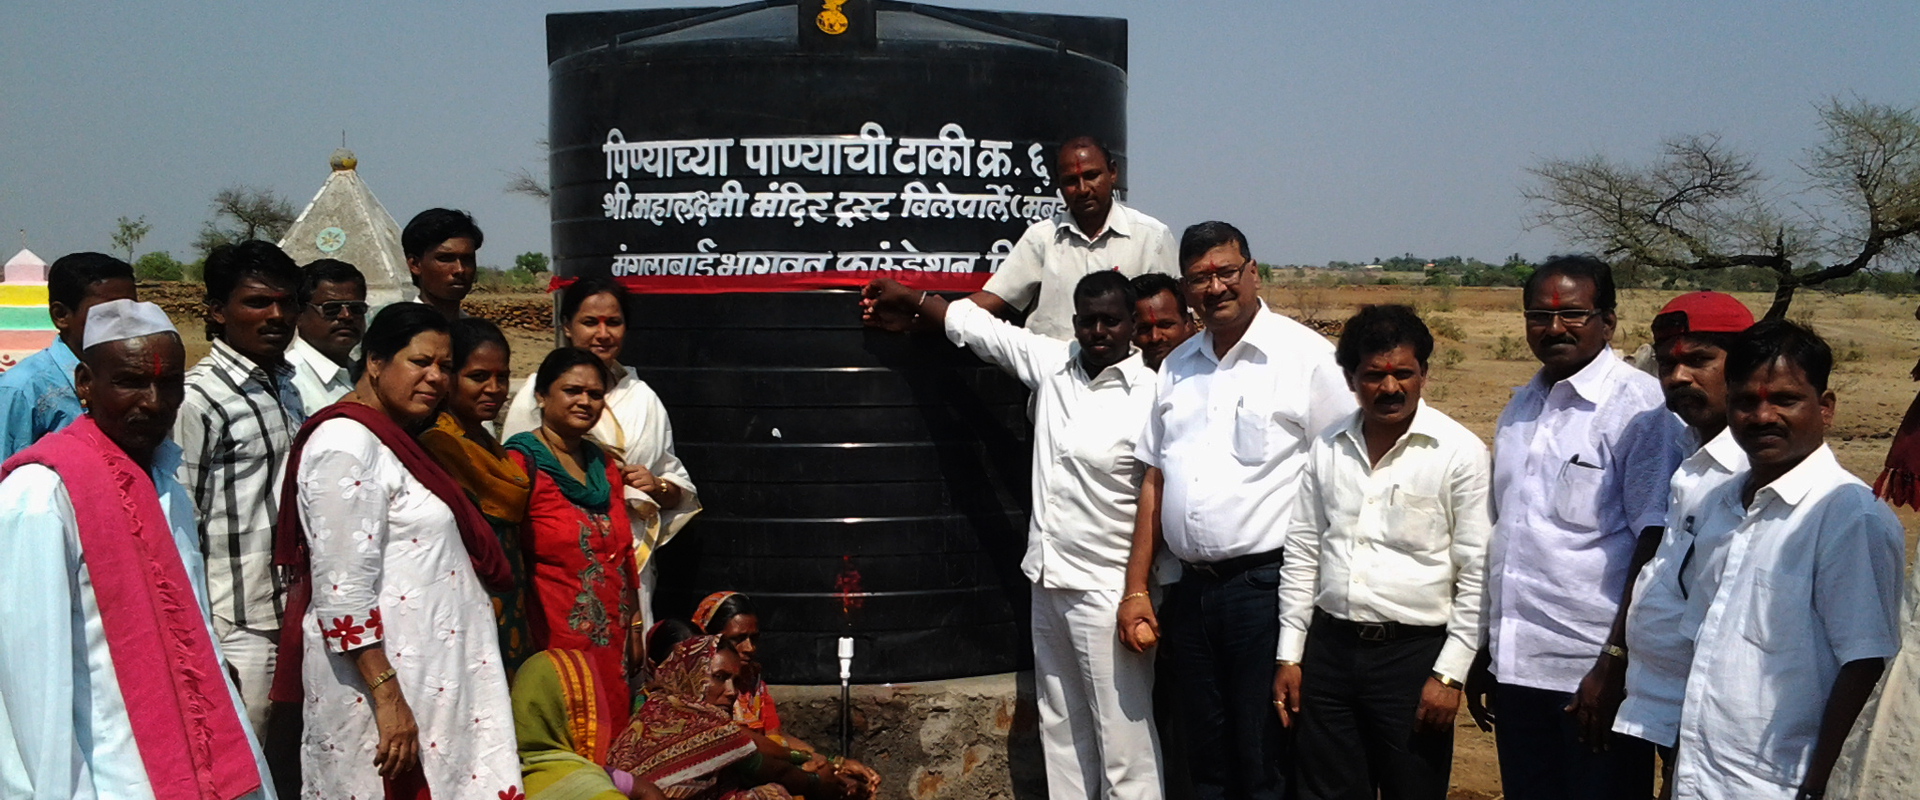 Draught relief in Solapur District